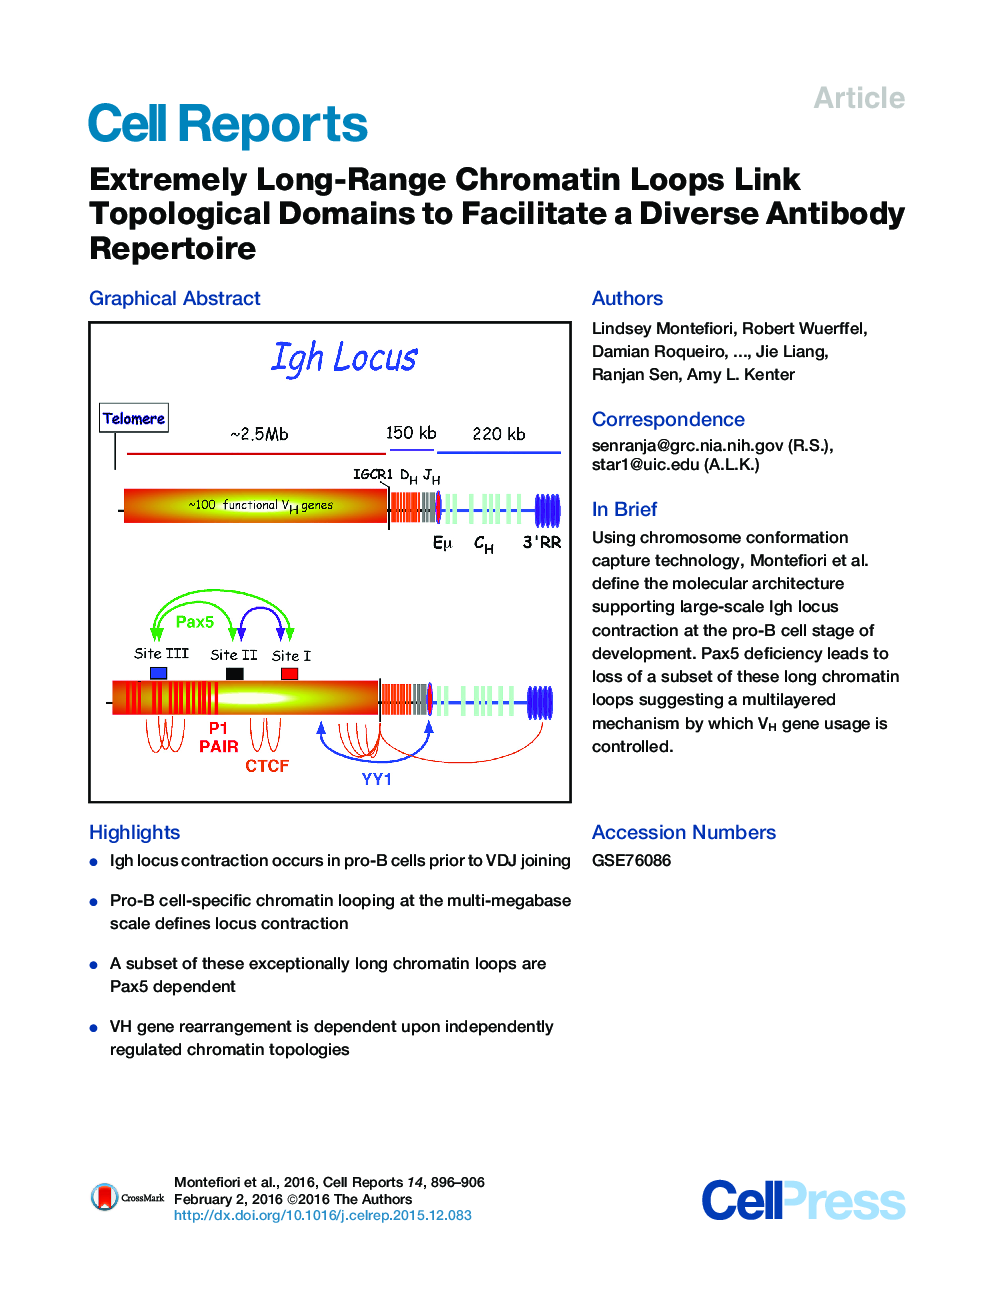 Extremely Long-Range Chromatin Loops Link Topological Domains to Facilitate a Diverse Antibody Repertoire 